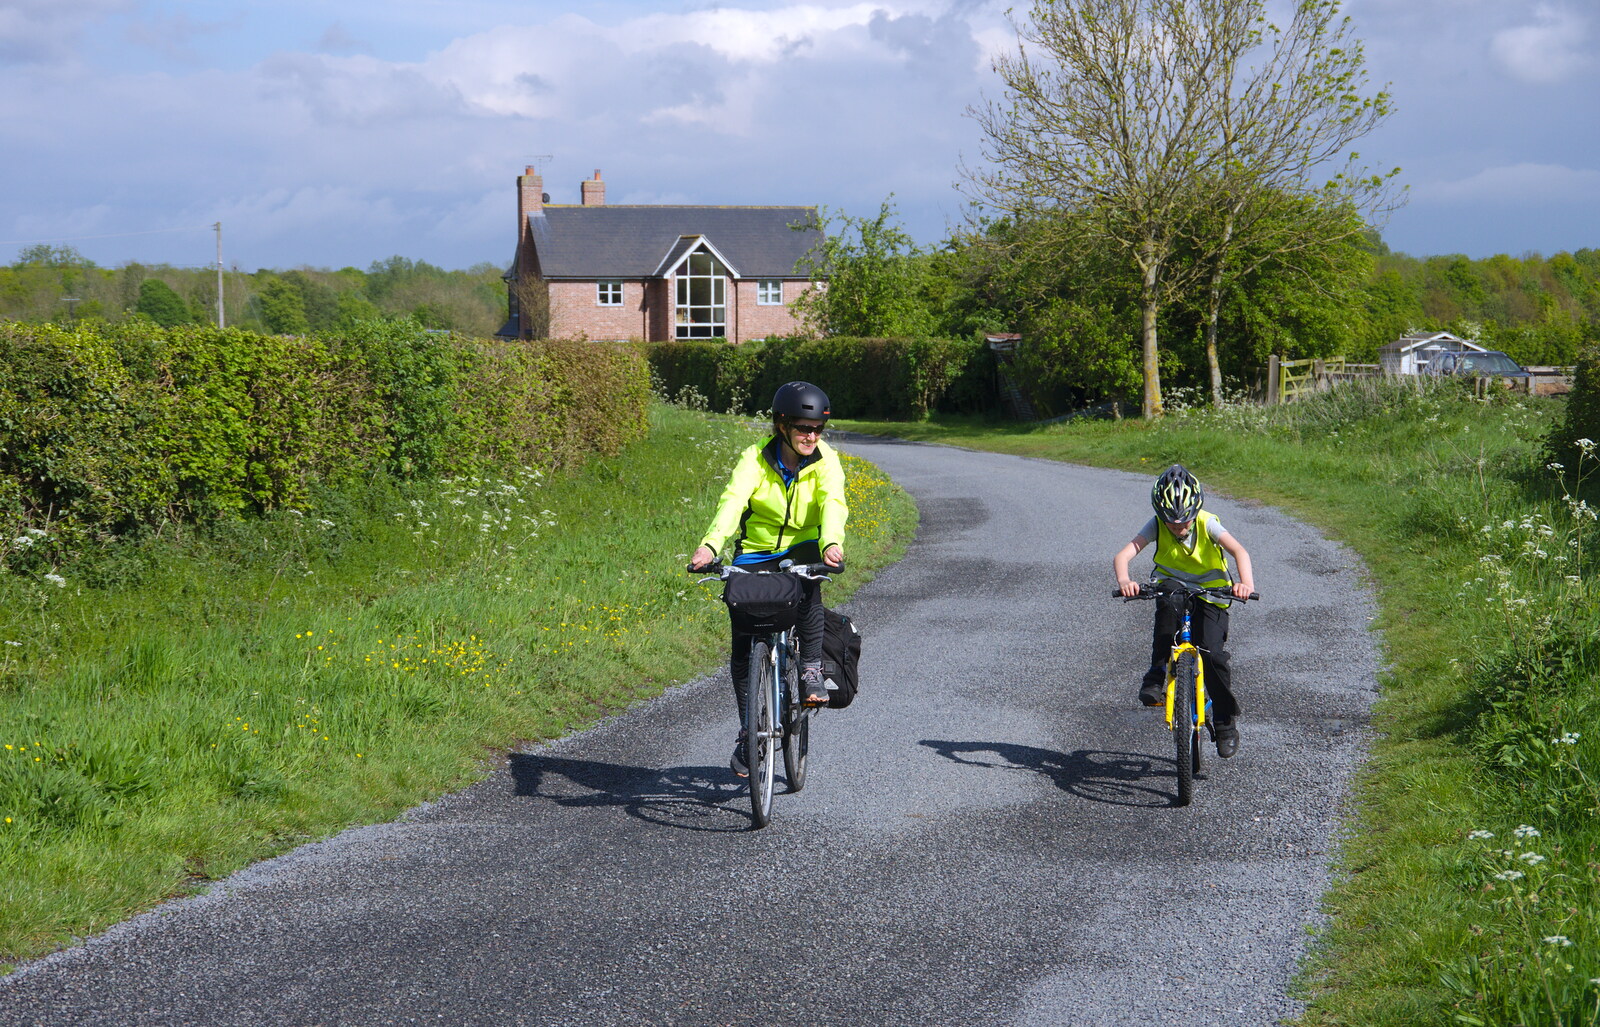 The BSCC Bike Ride 2019, Coggeshall, Essex - 11th May 2019: Isobel and Fred on their bikes